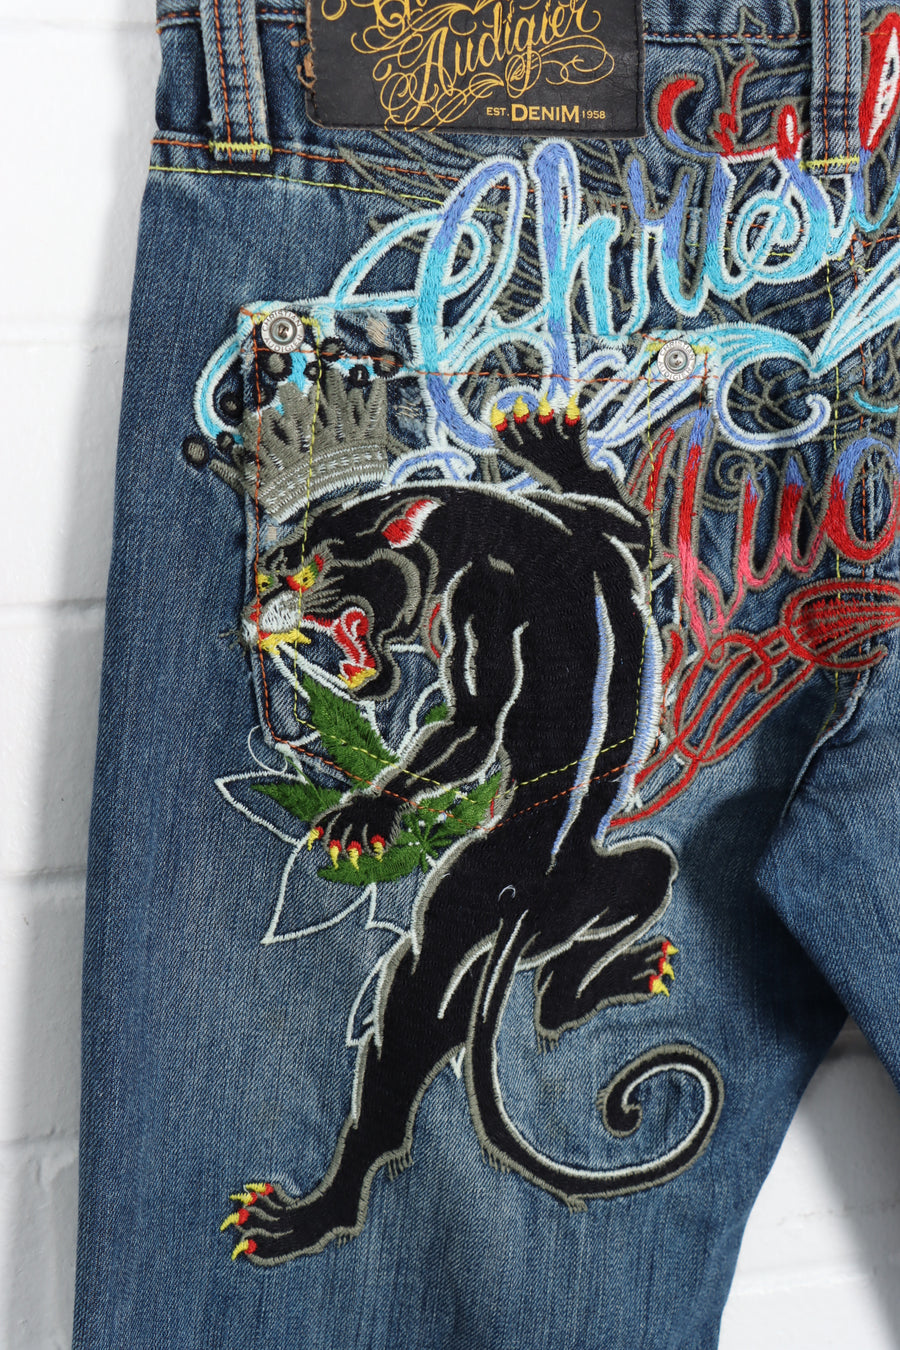 CHRISTIAN AUDIGIER Y2K Embroidered Tattoo Script & Panther Jeans (30 x 34)